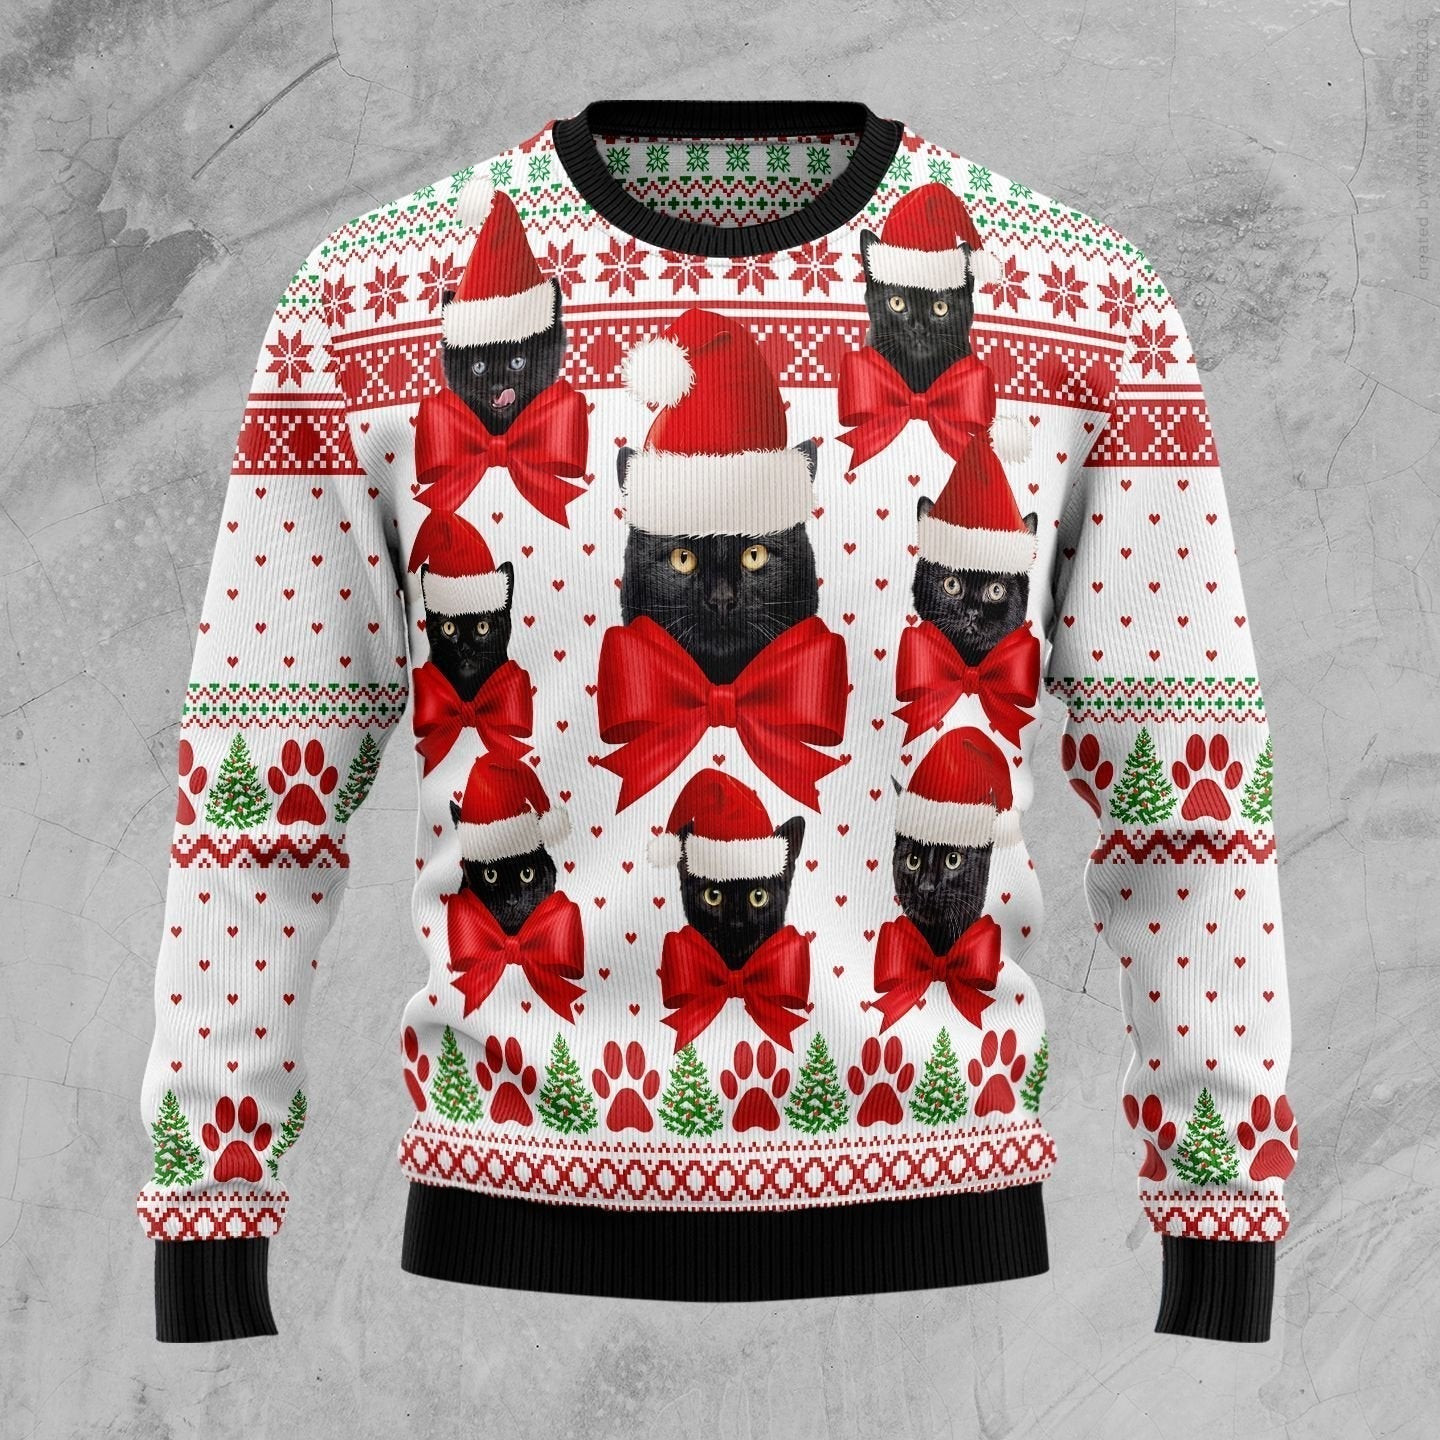 Black Cat Ball Ugly Christmas Sweater Ugly Sweater For Men Women, Holiday Sweater